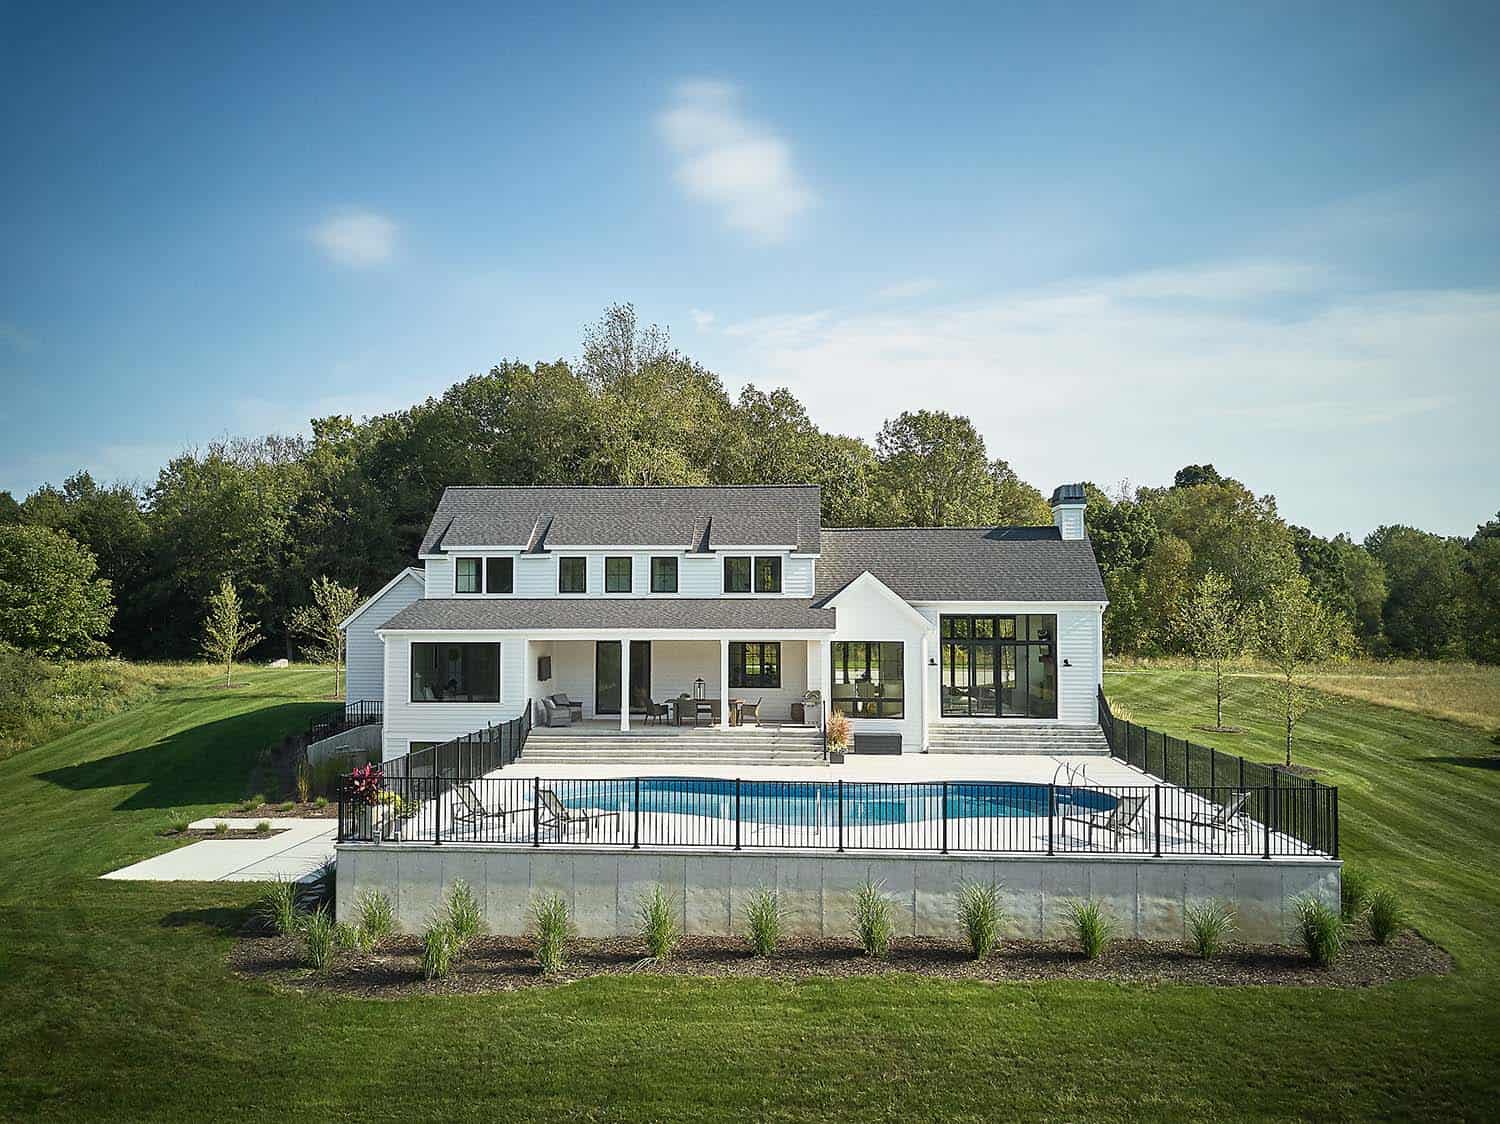 modern farmhouse home exterior backyard view with a pool